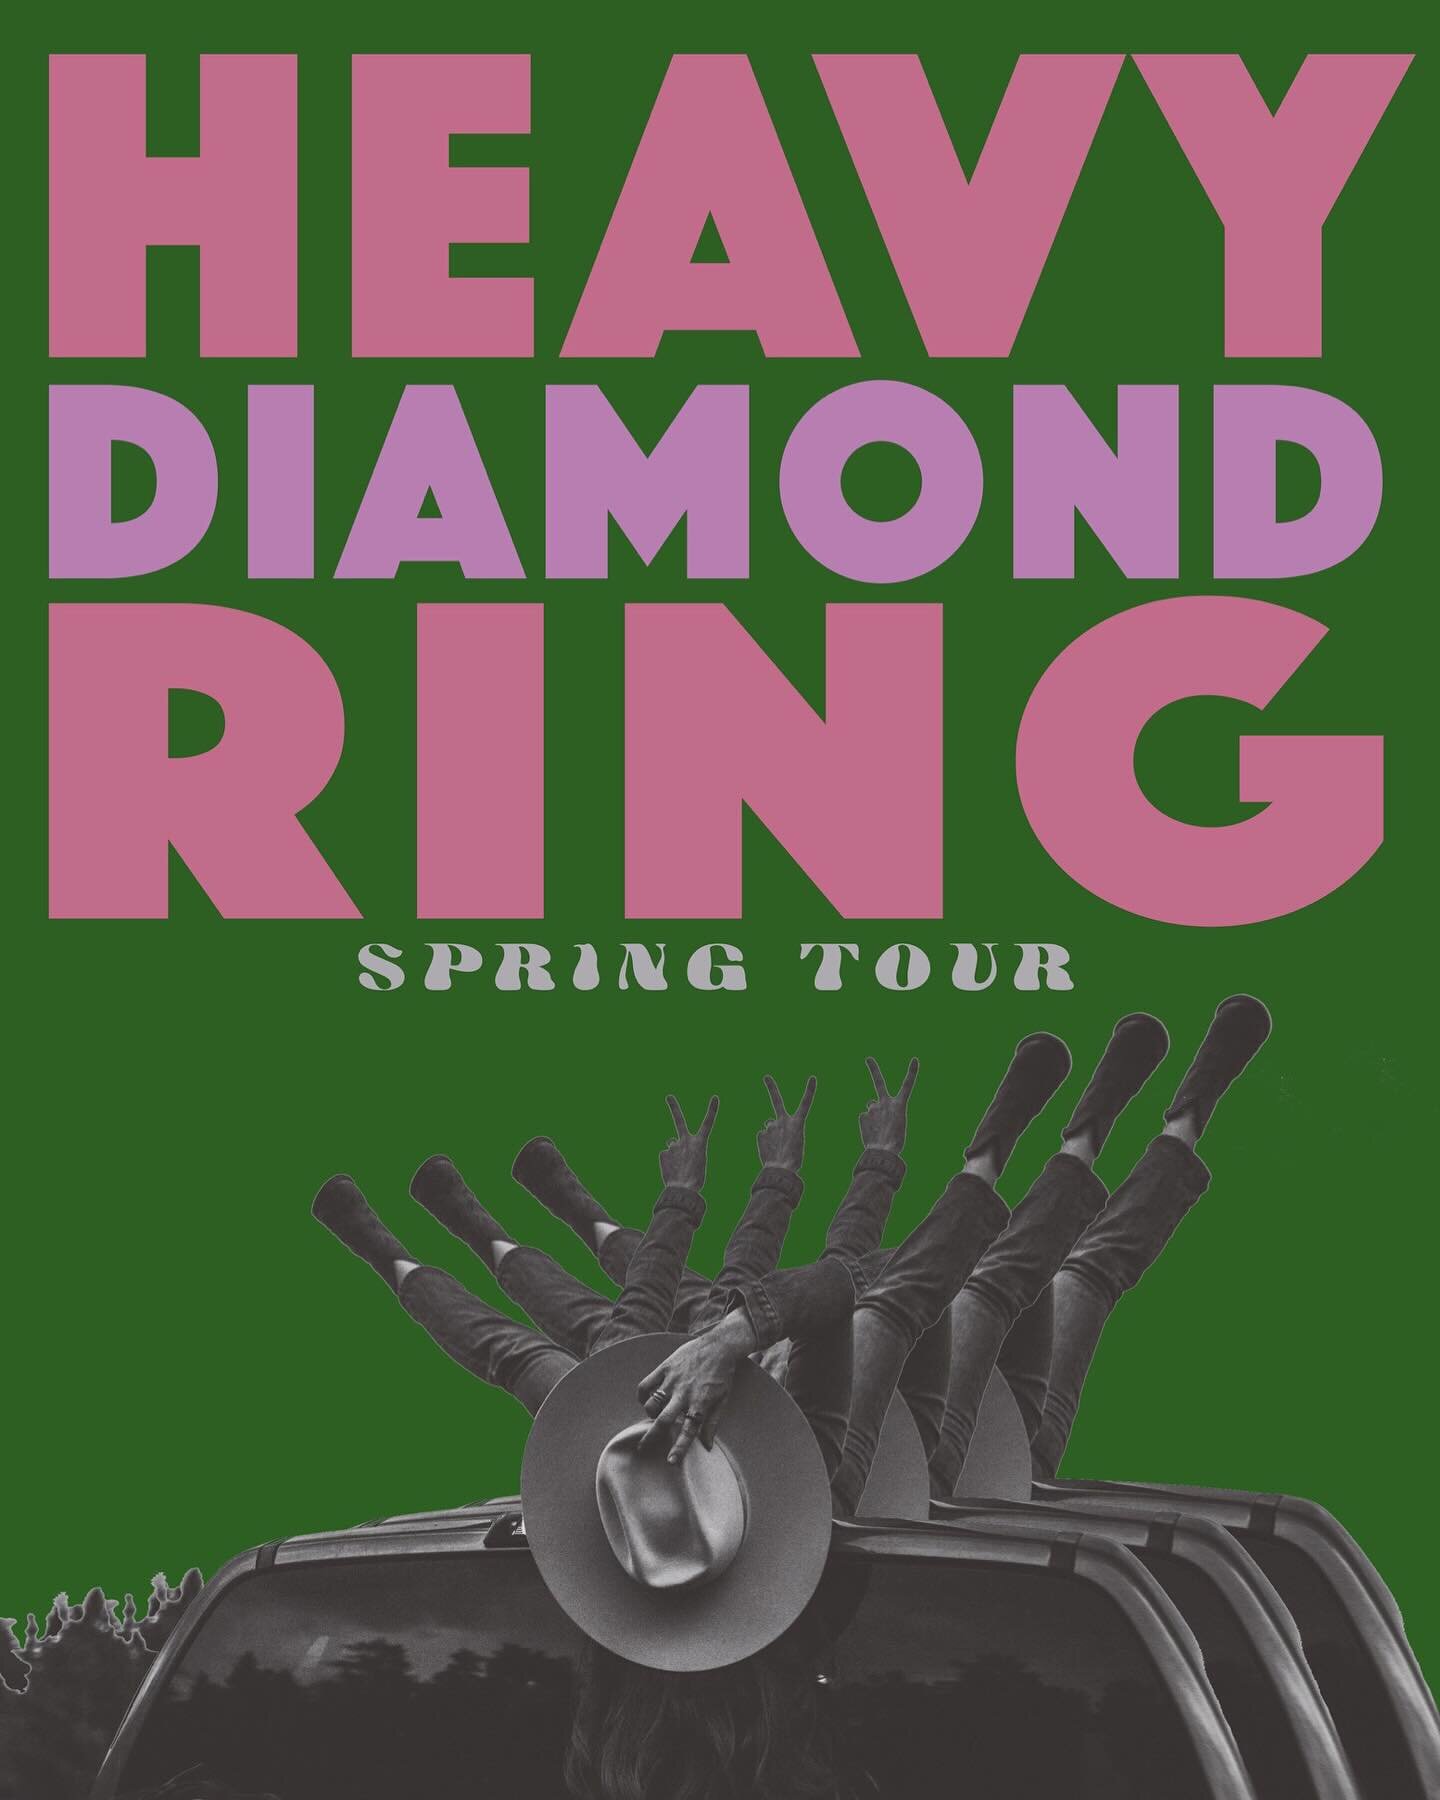 We&rsquo;ve been looking forward to this show all season long!! @heavydiamondring 💎 💎 at 9pm!!
⠀⠀⠀⠀⠀⠀⠀⠀⠀
Some things are just meant to last. When Sarah Anderson and Paul DeHaven met and began playing together in 2004, they had no idea just how deep